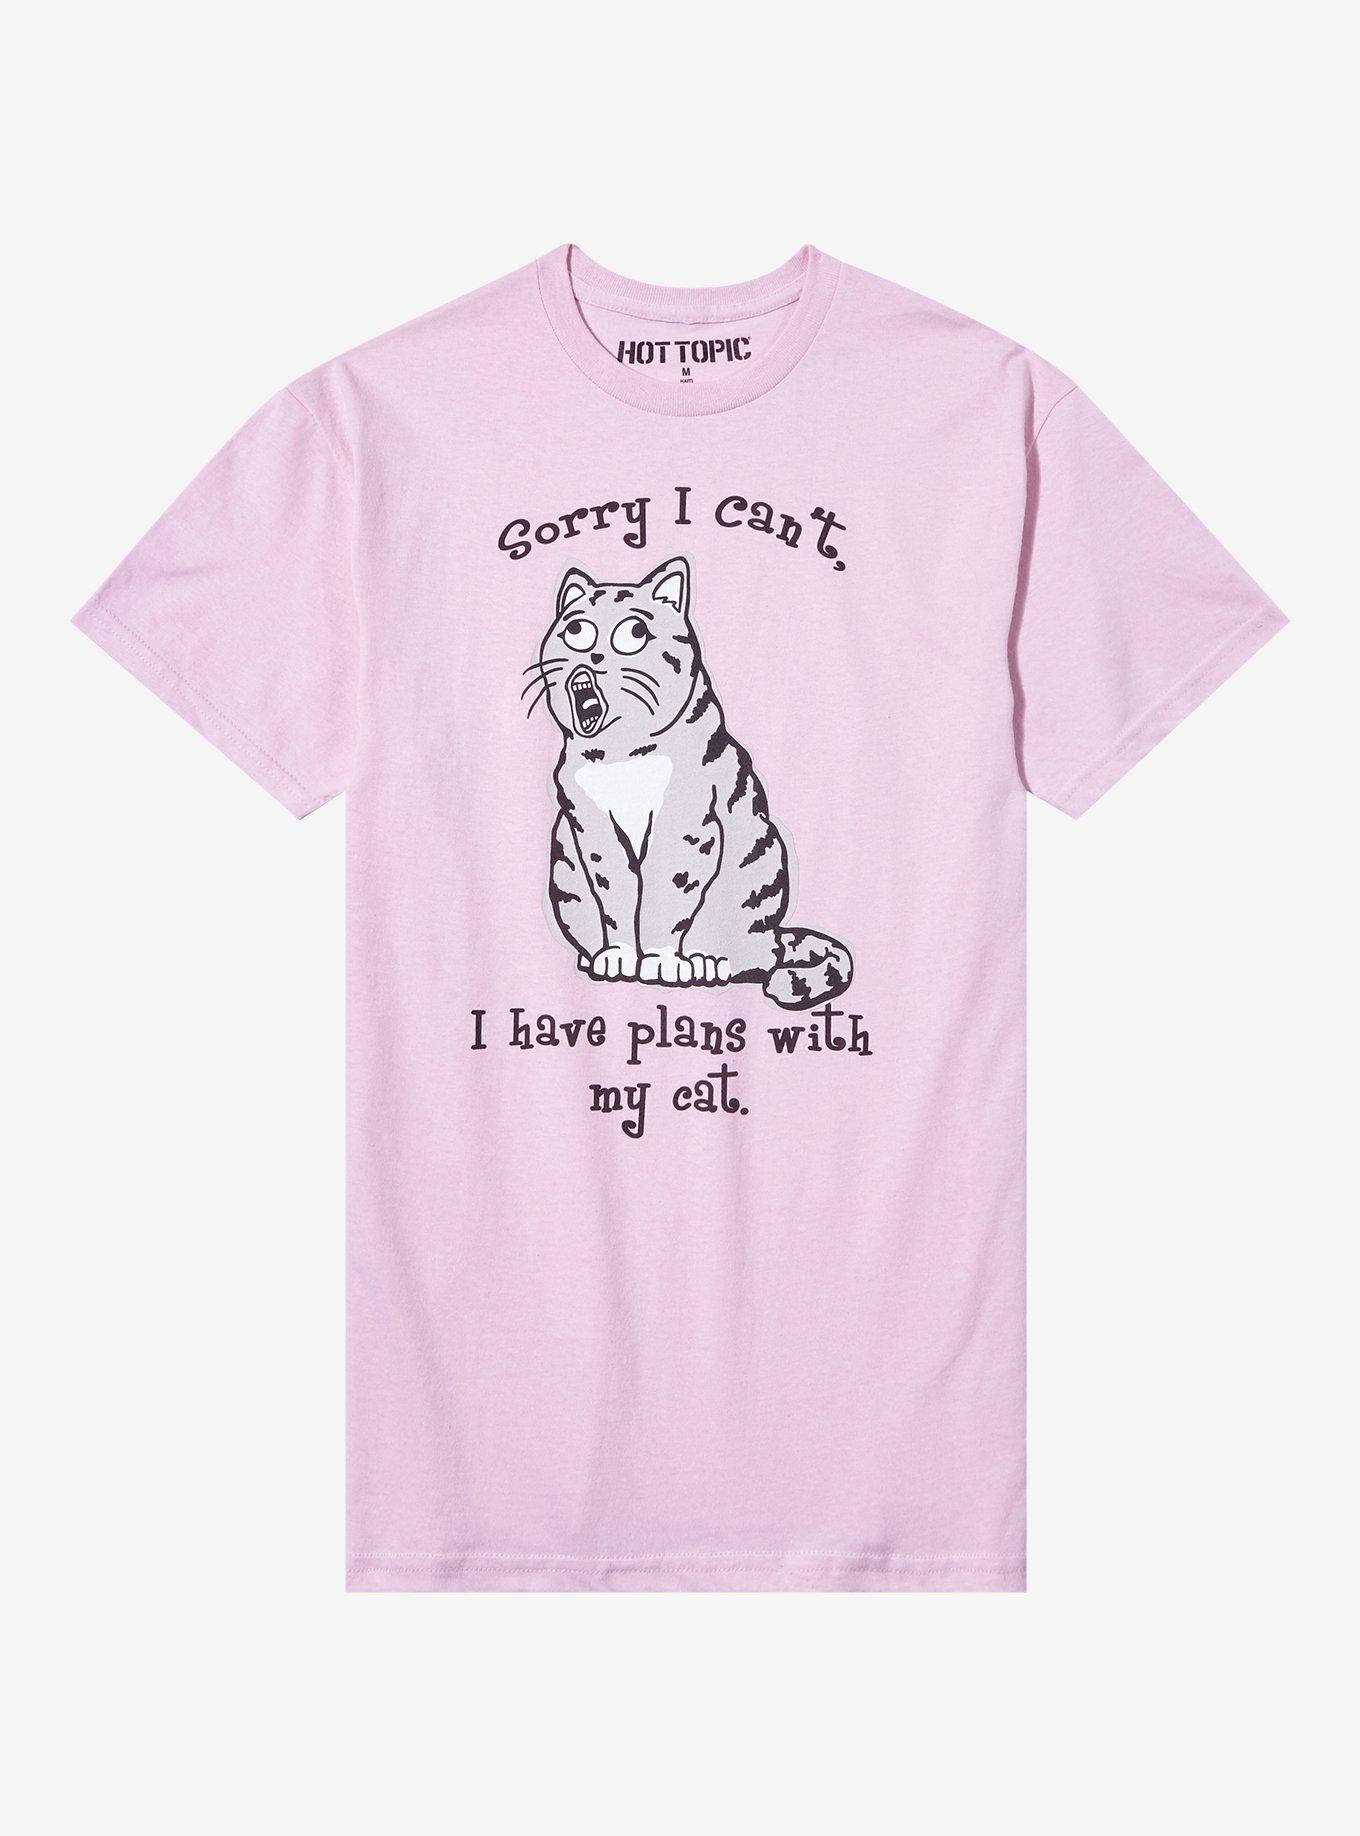 Plans With My Cat Pastel Pink T-Shirt, PINK, hi-res